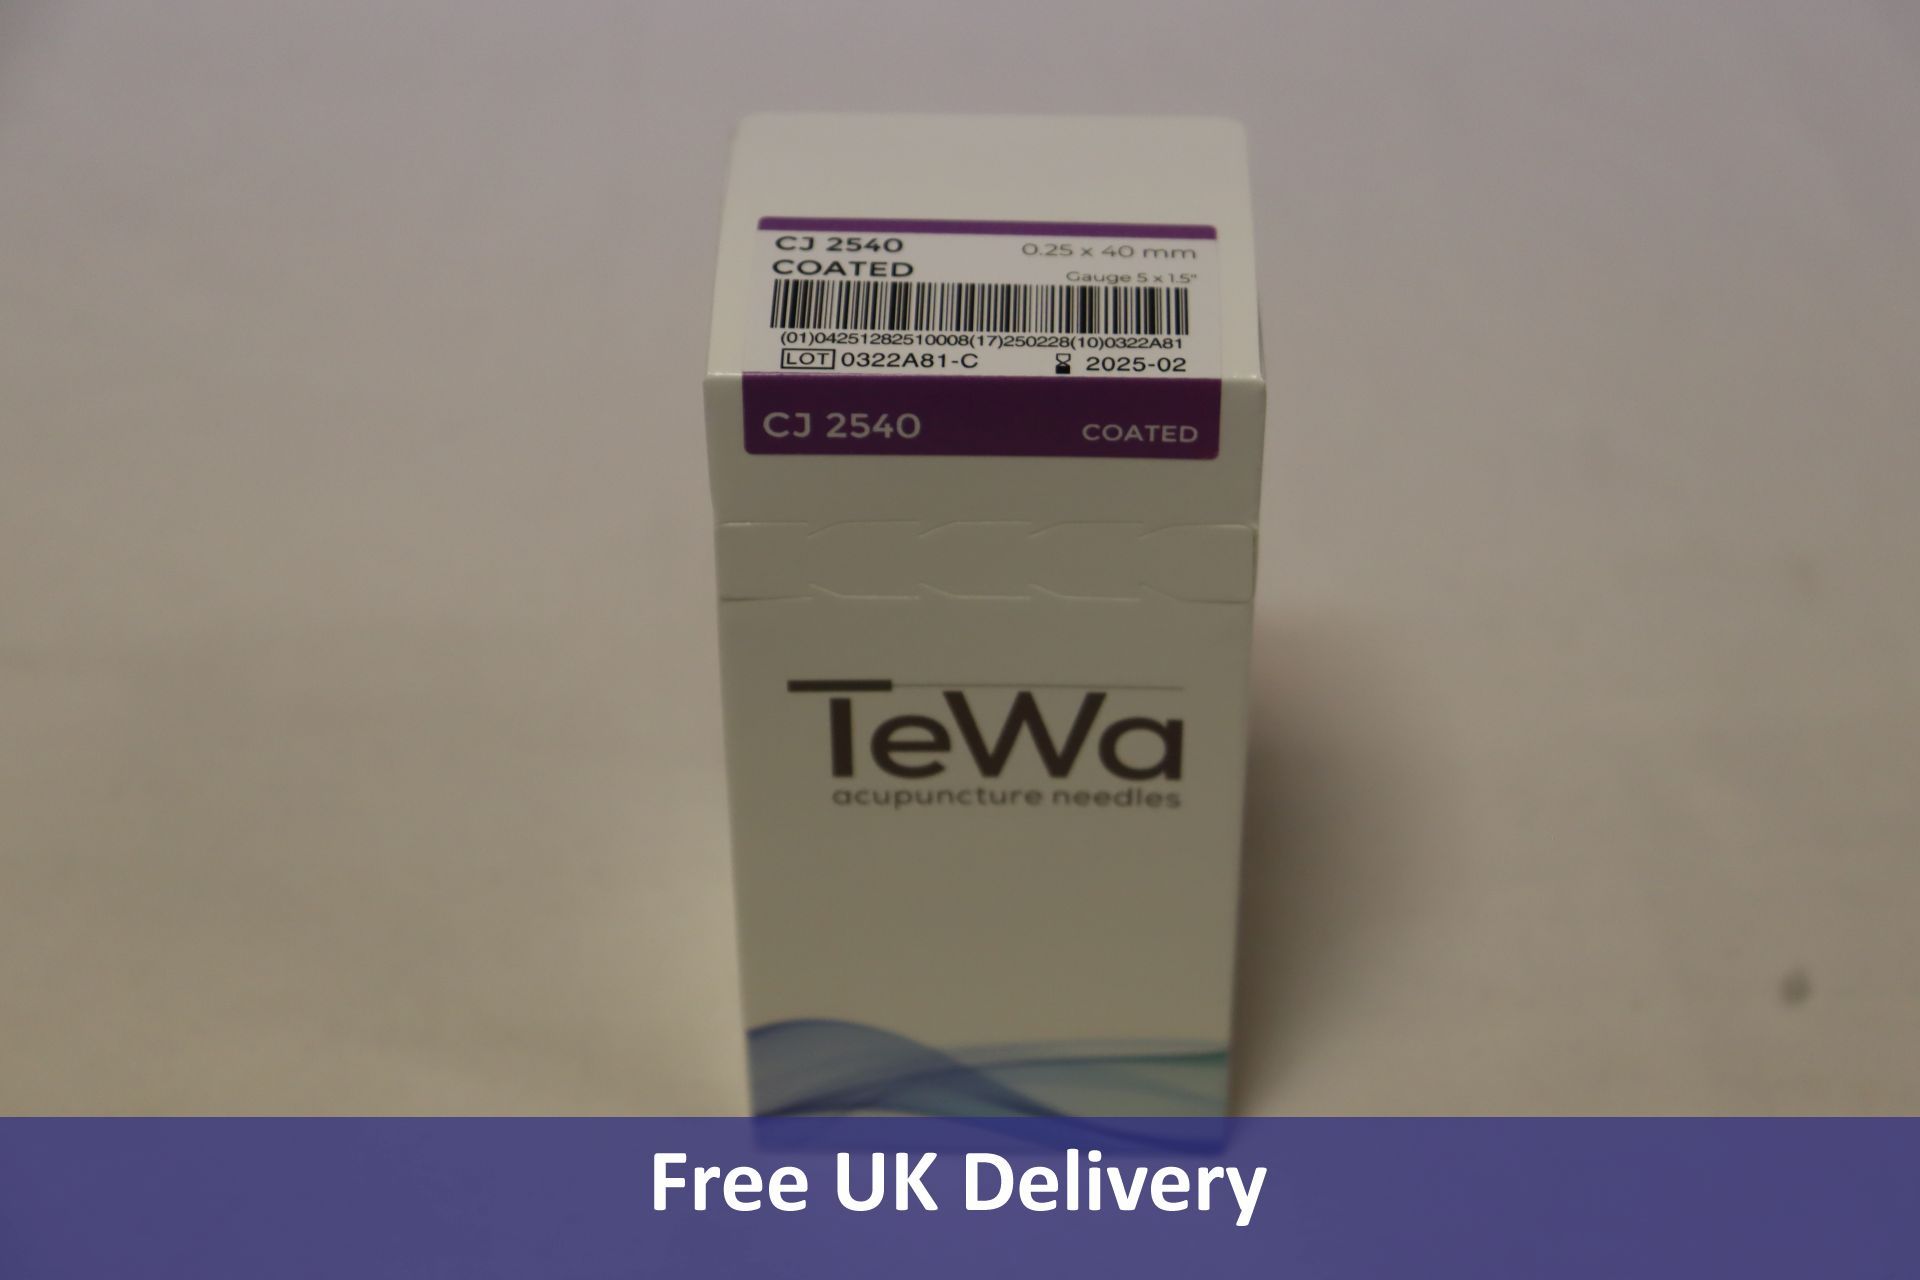 Ten-thousand Tewa Acupuncture Needles, 0.20 x 40mm, in 100 packs of 100 - Image 9 of 10